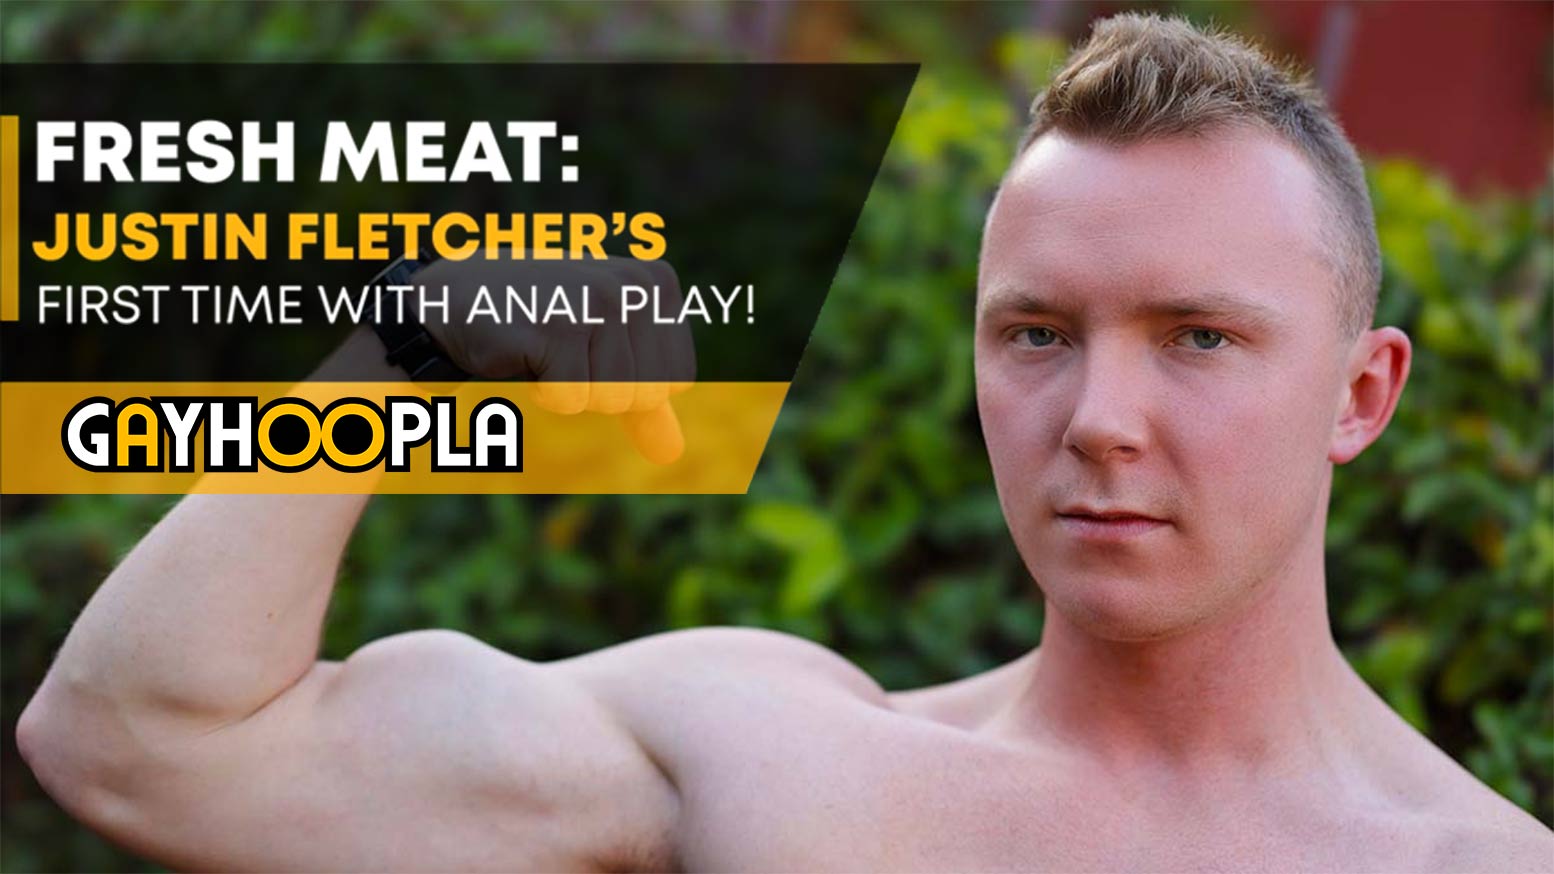 Fresh Meat: Justin Fletcher's First Time With Anal Play!